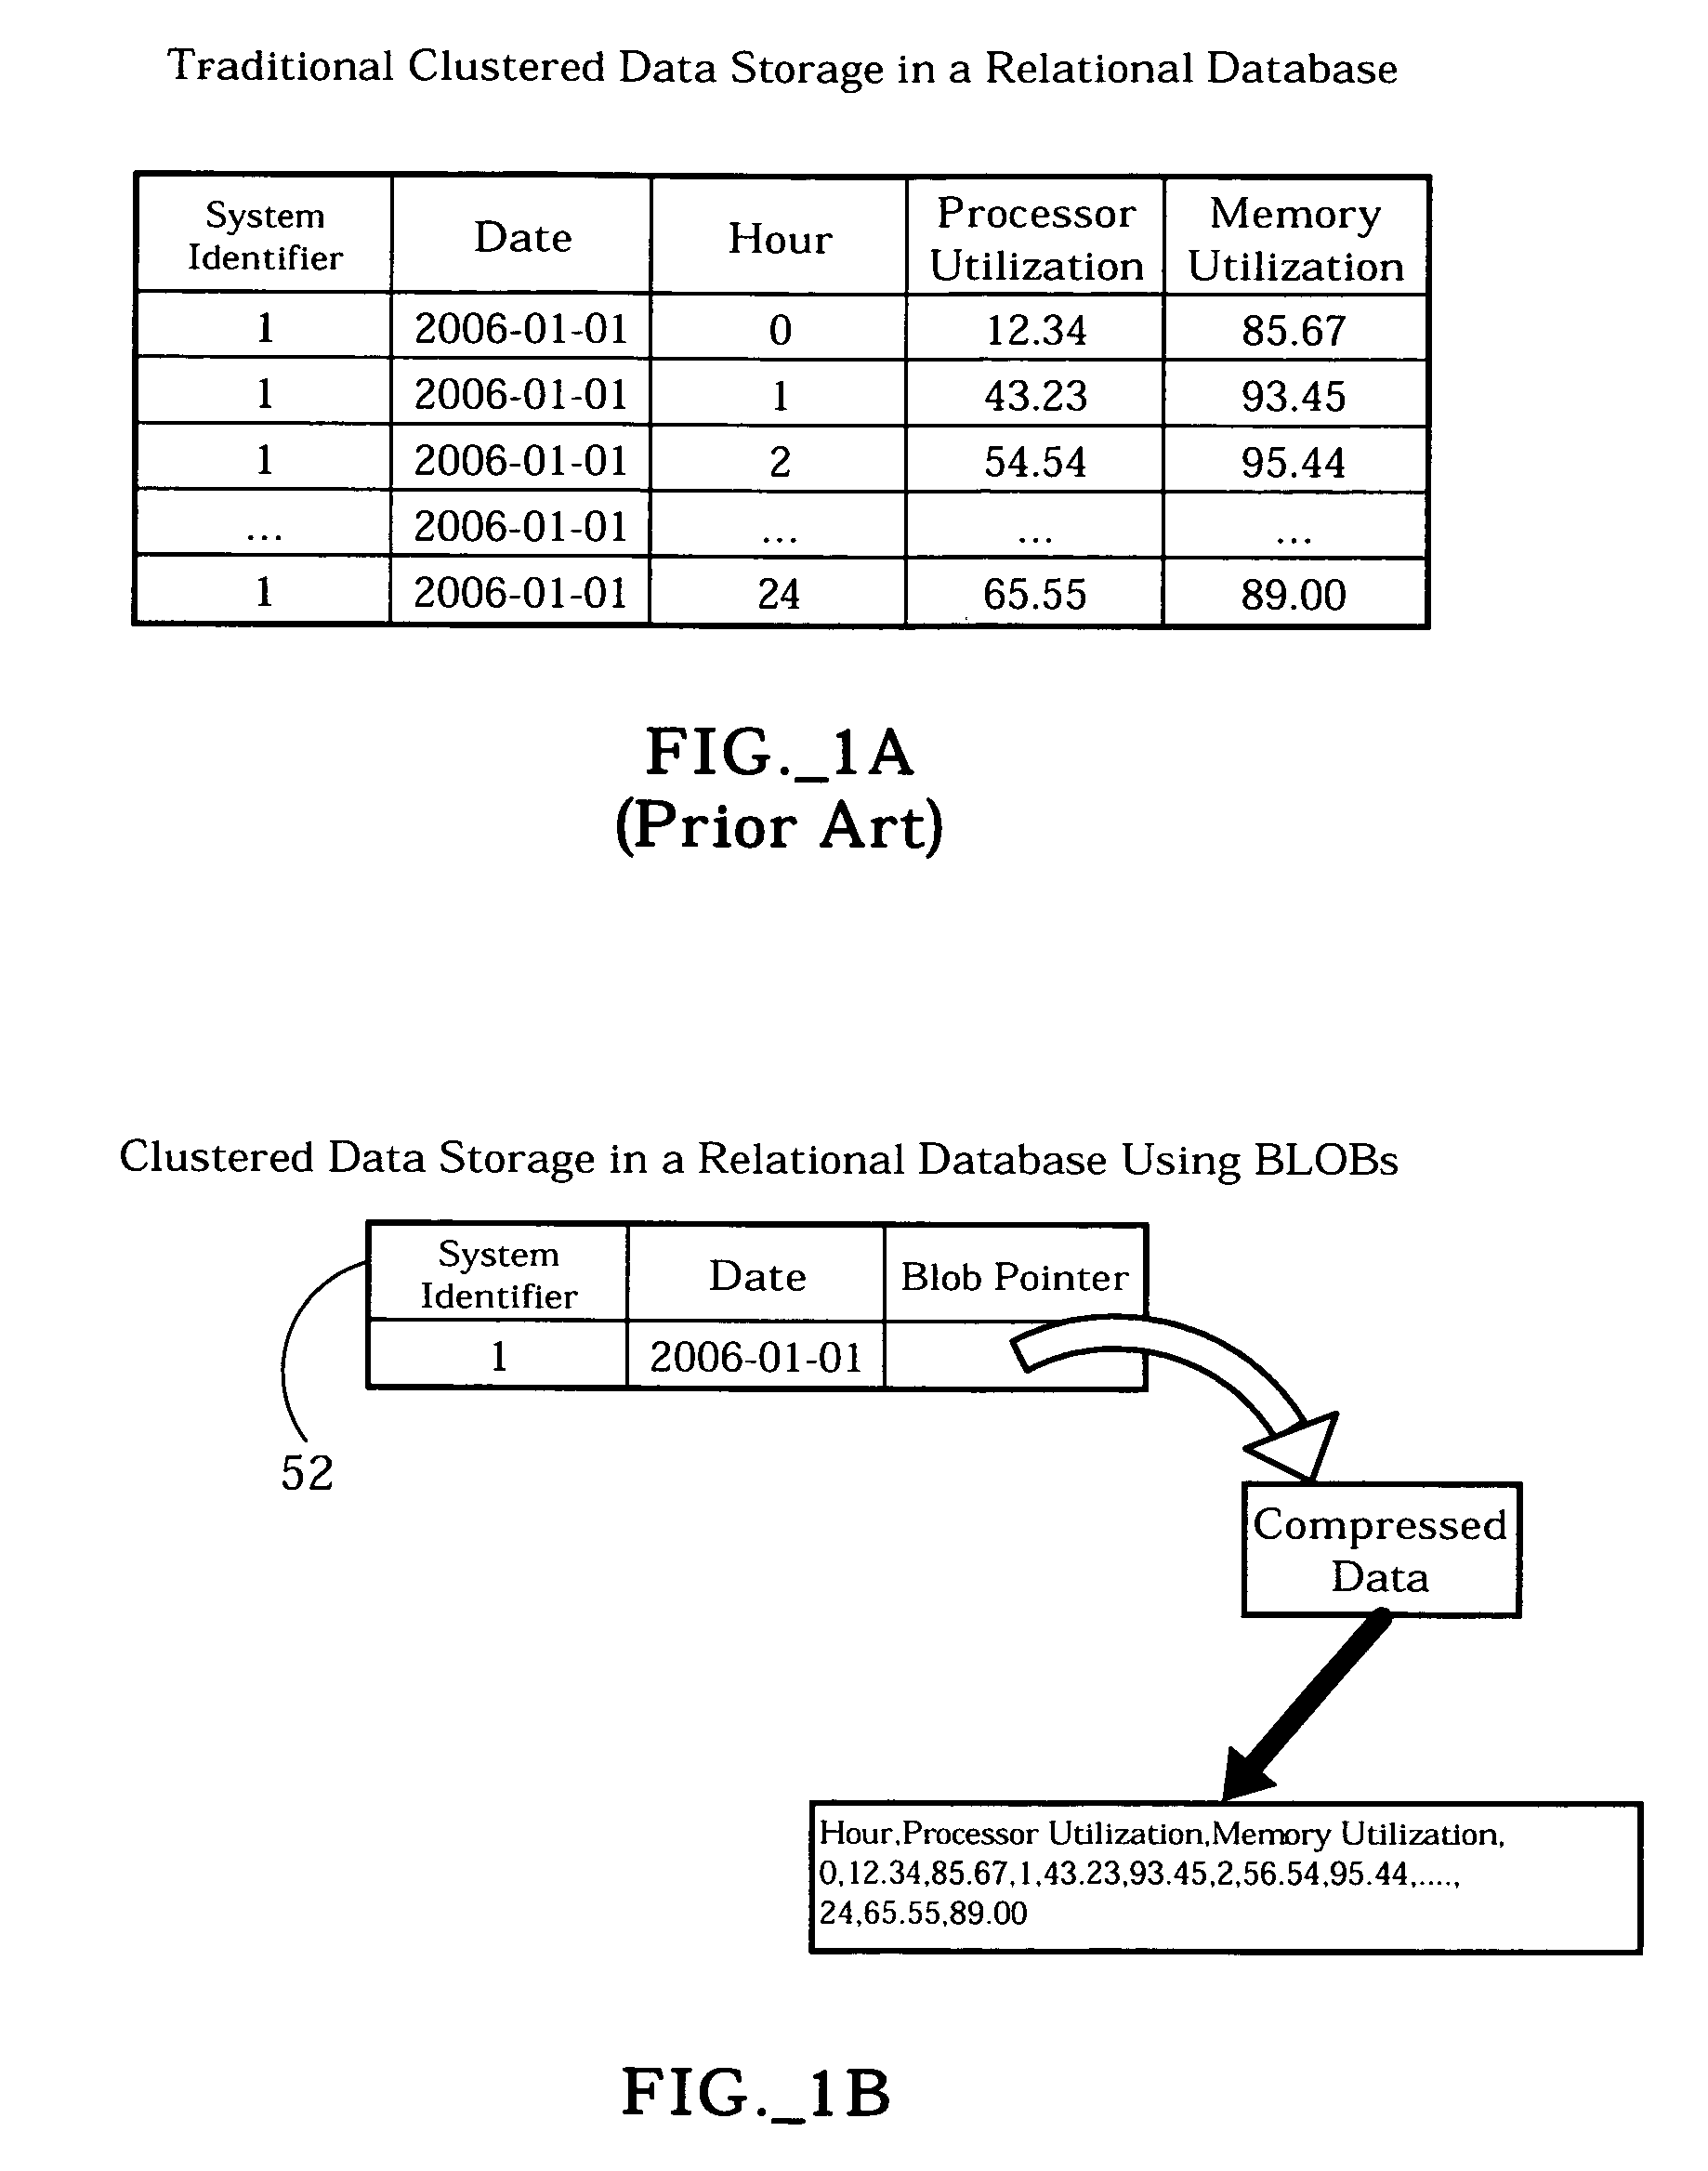 Optimal data storage and access for clustered data in a relational database